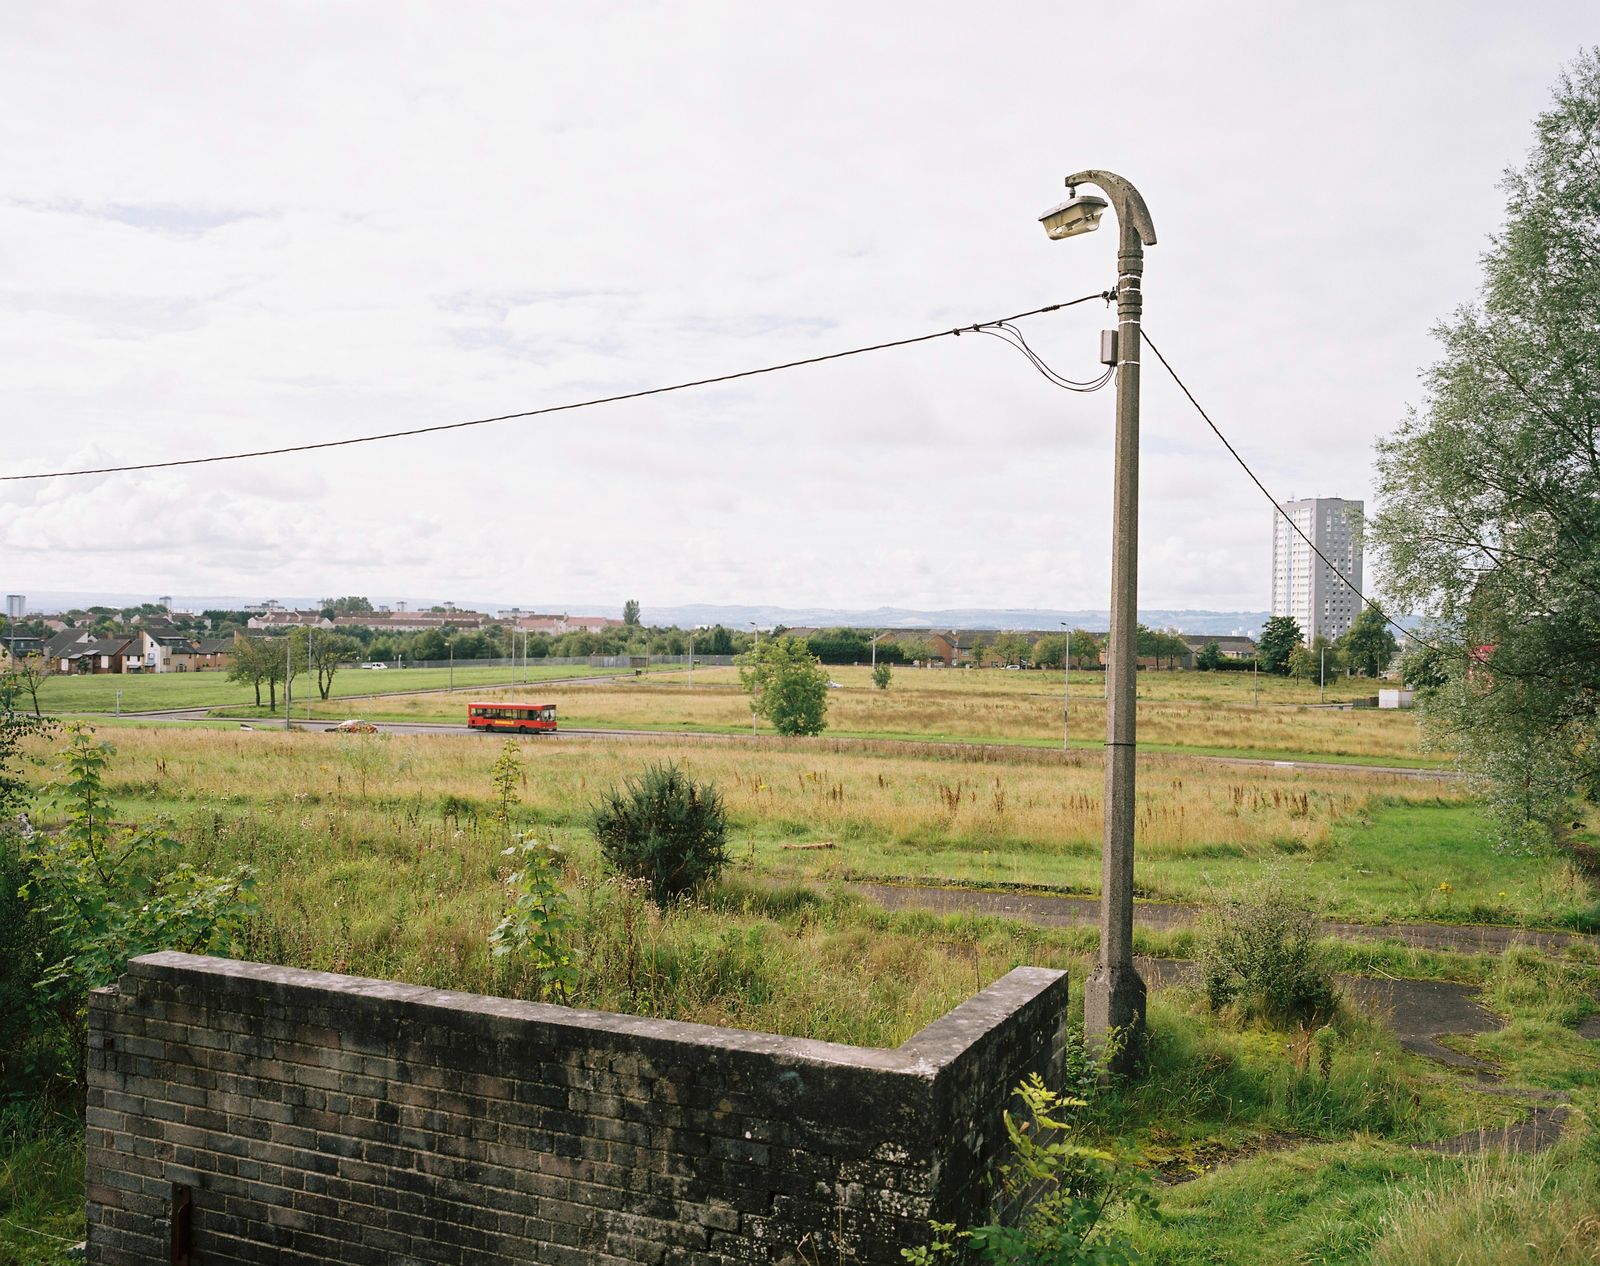 © Kirsty Mackay - Ryedale Place, Drumchapel. A community raised to the ground.